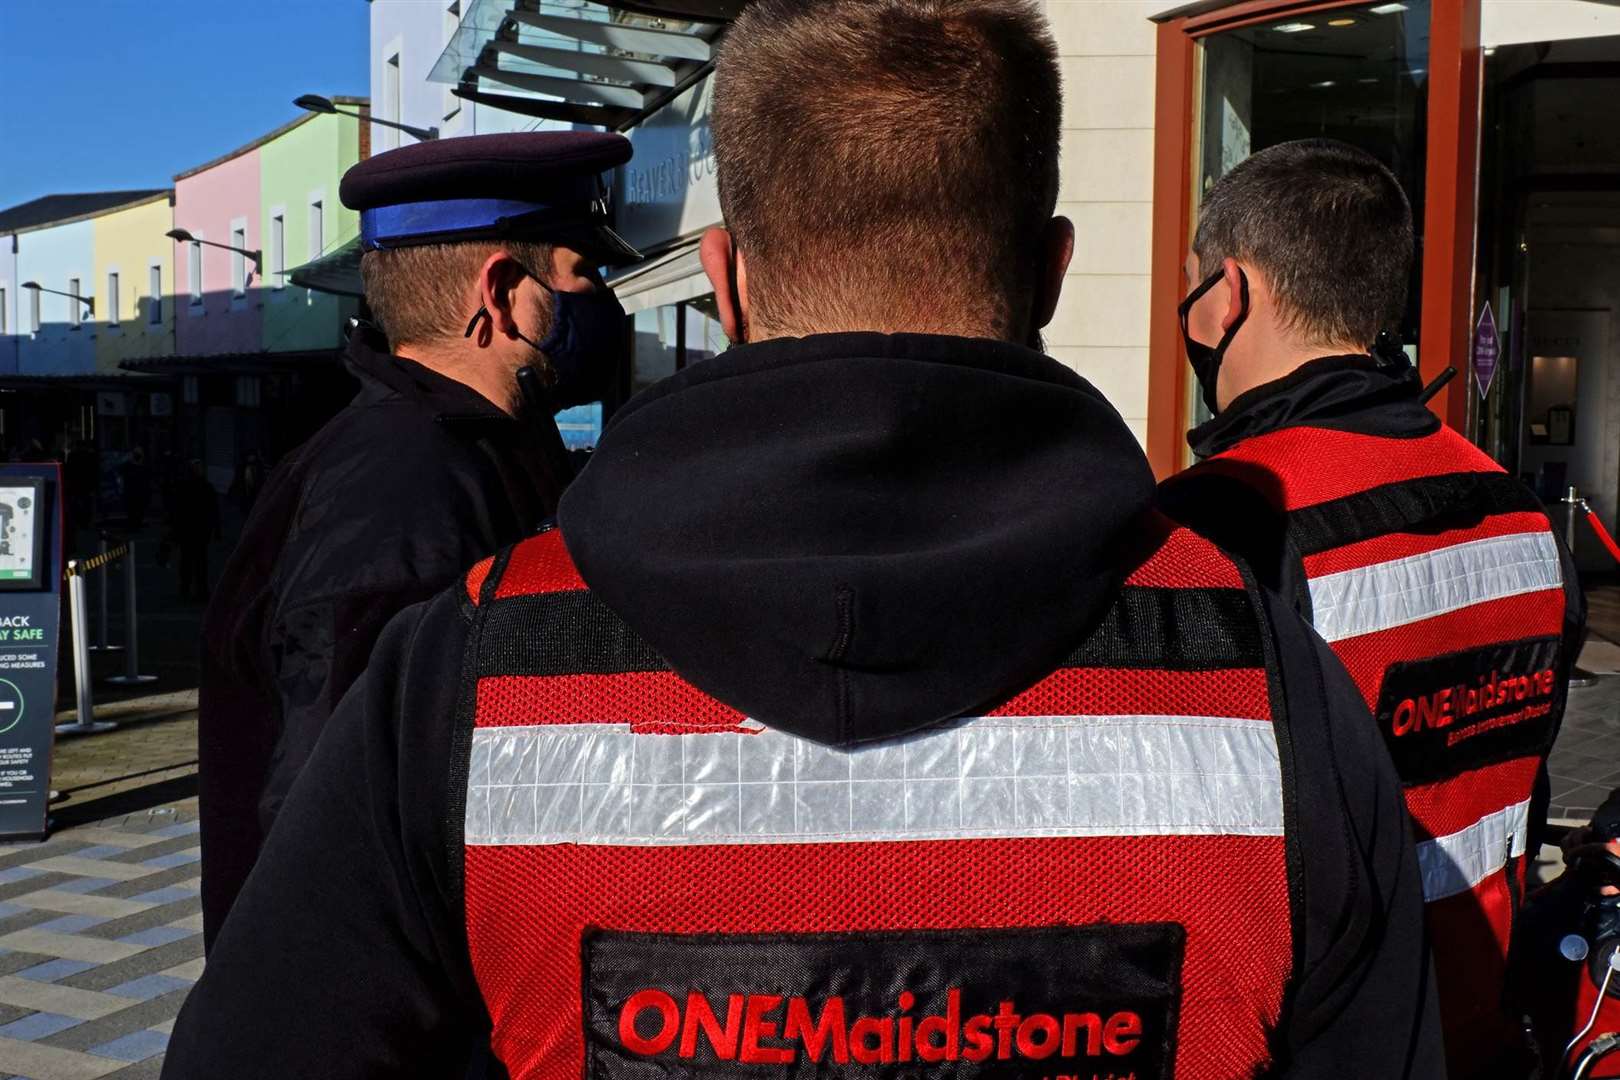 One Maidstone BID Ambassadors work with and assist police. Picture: One Maidstone